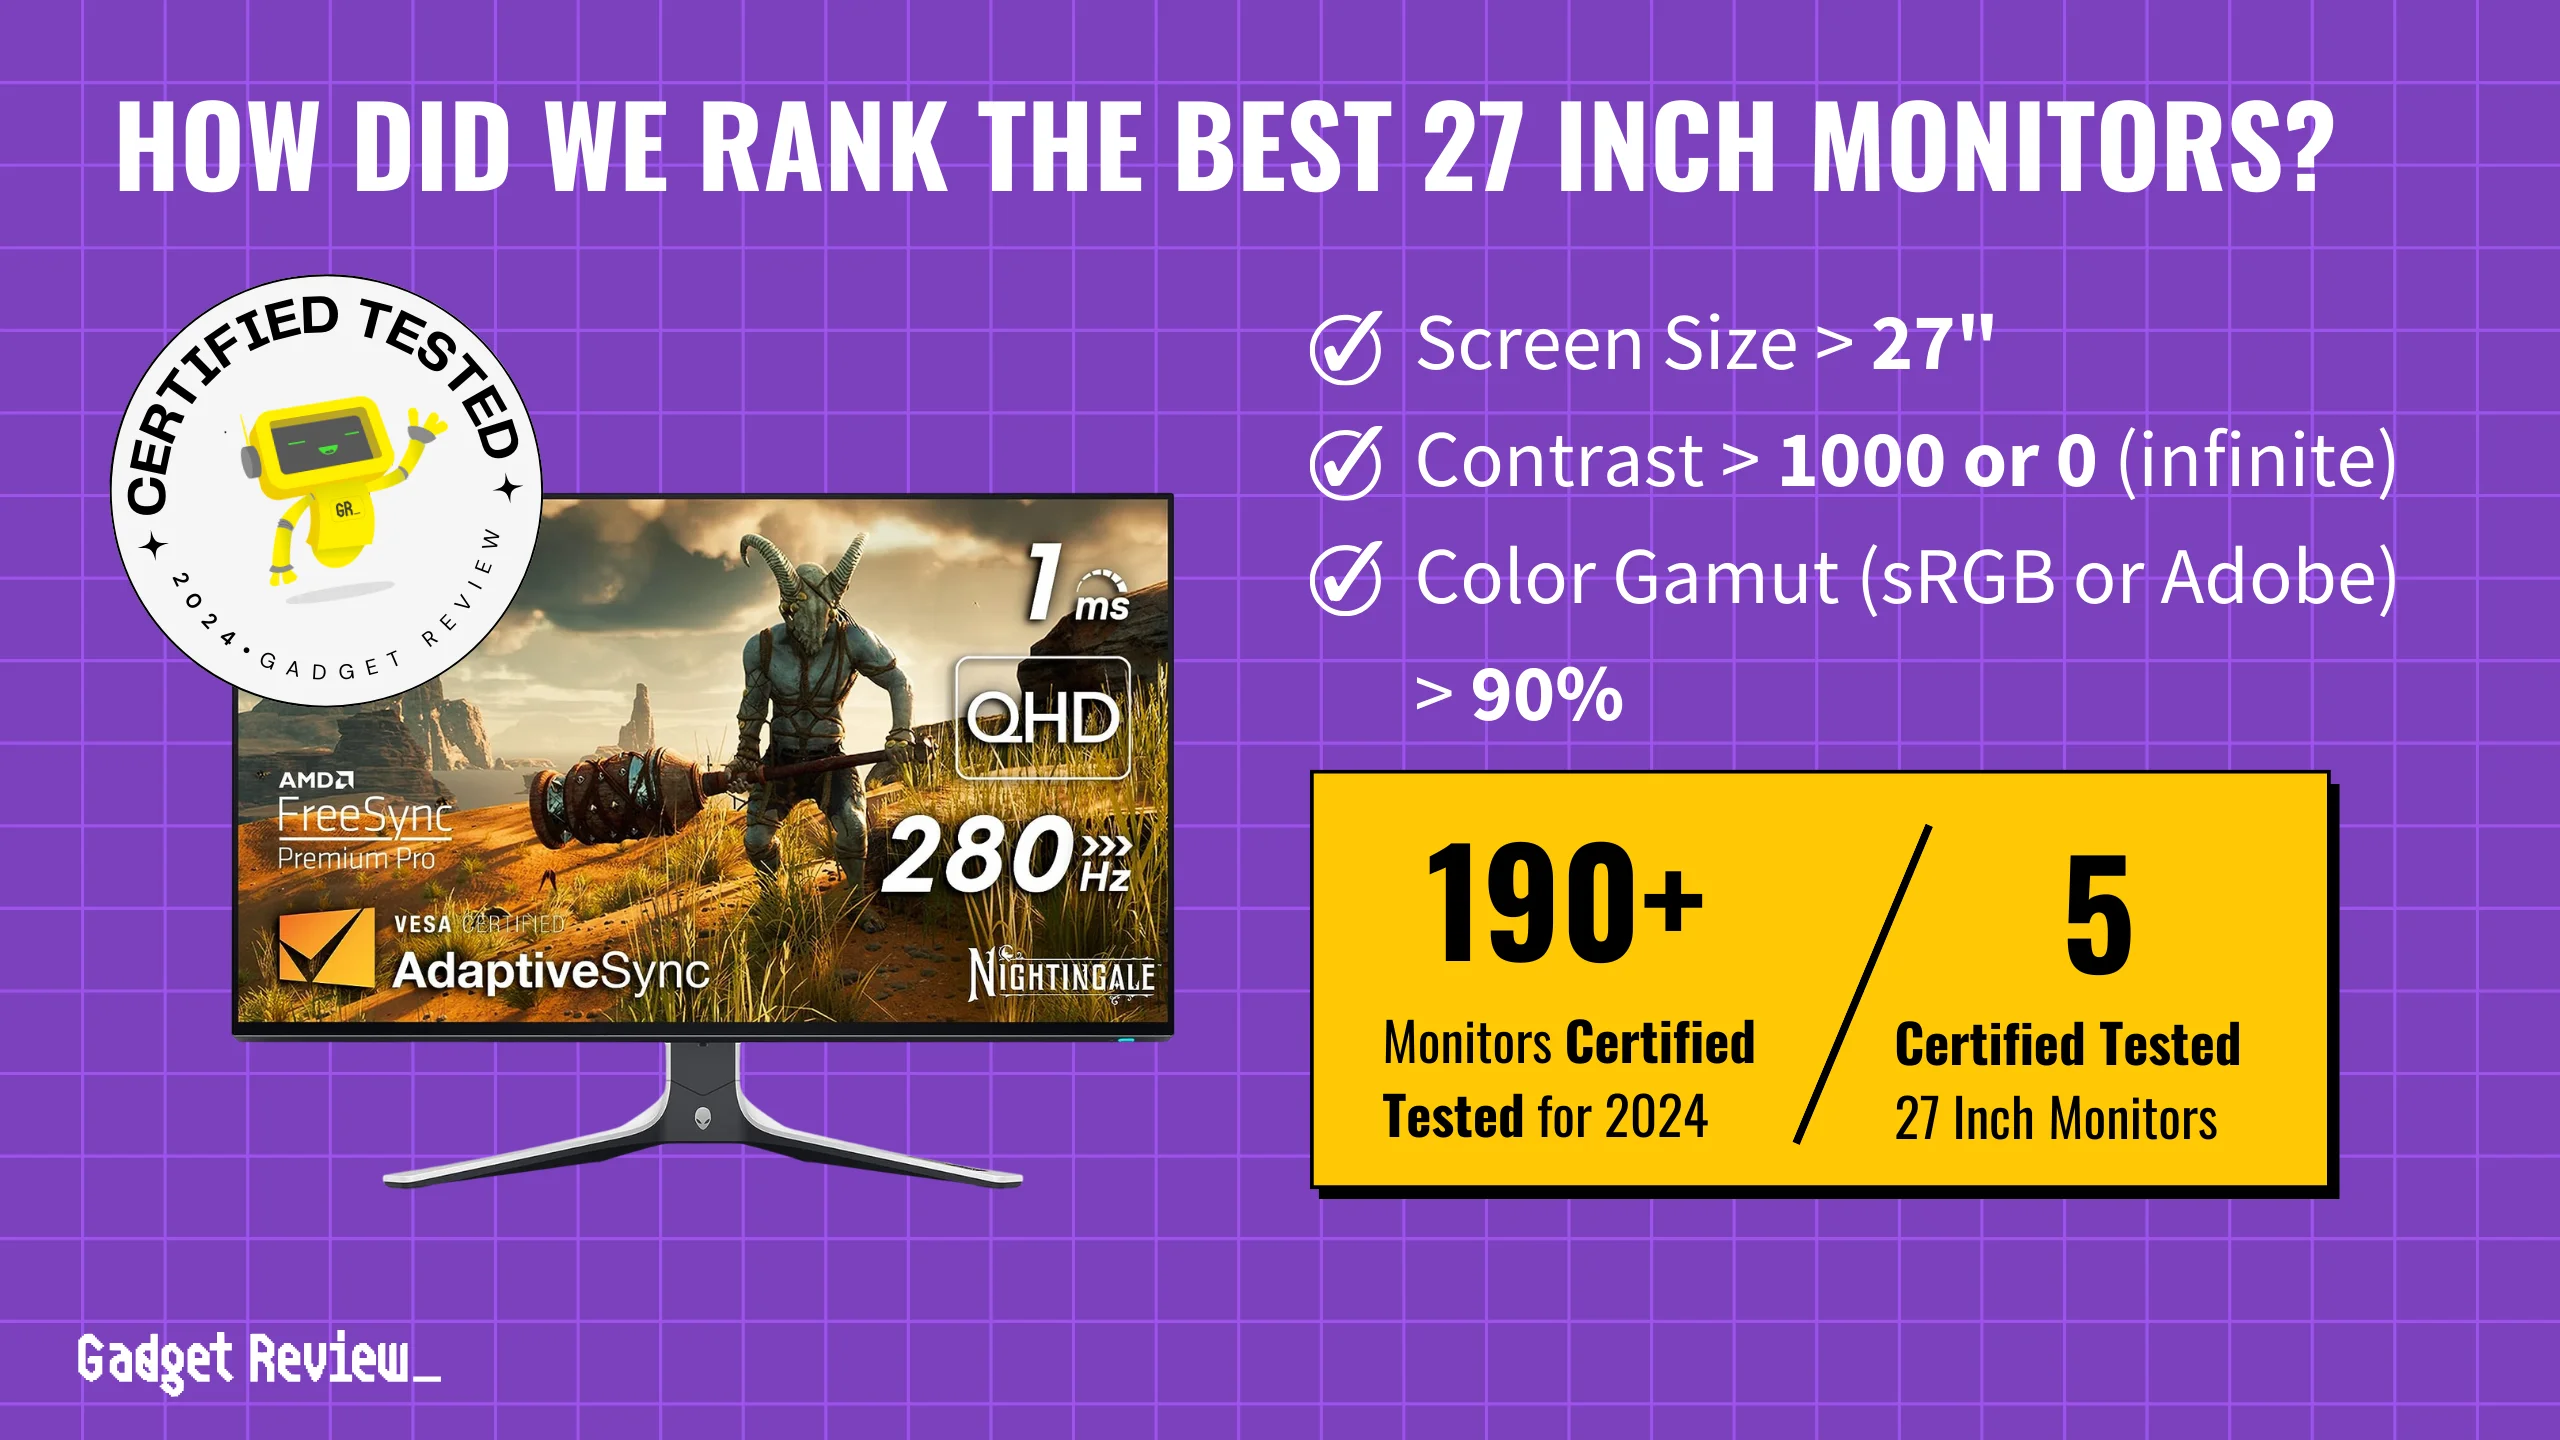 best 27 inch monitor guide that shows the top best computer monitor model